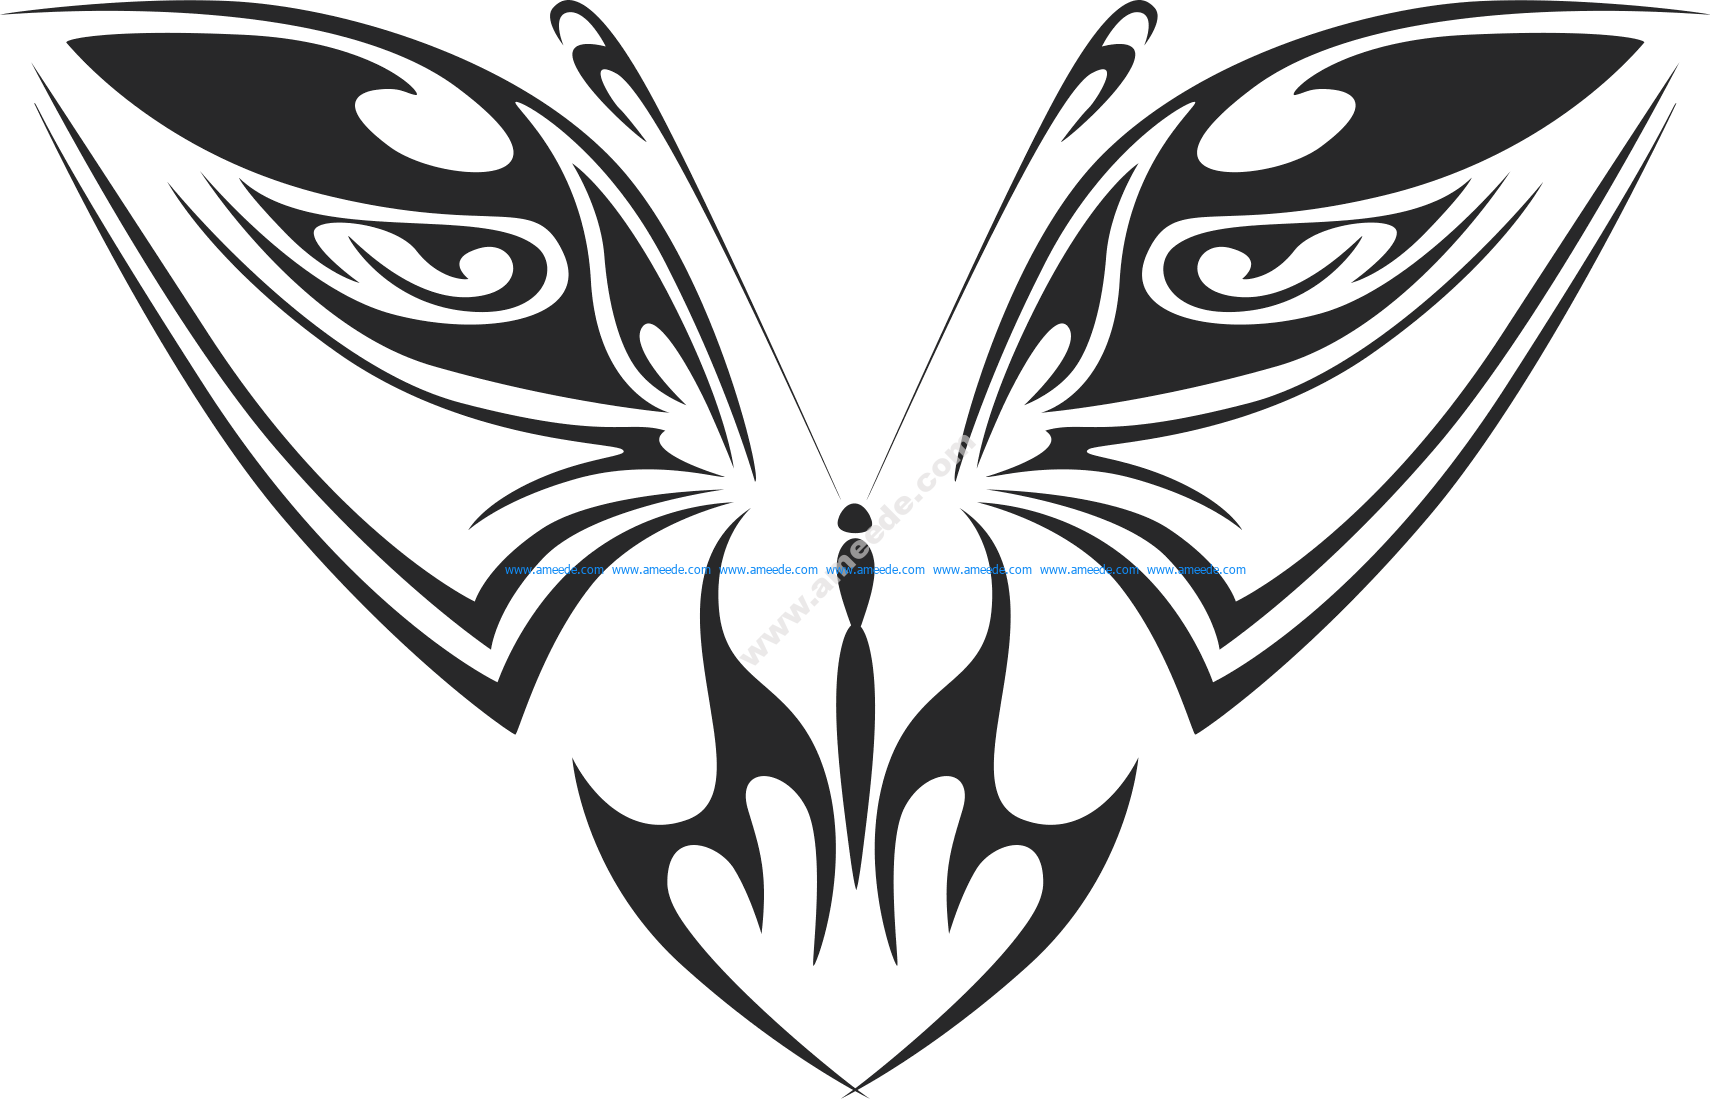 Download Tribal Butterfly Vector Art 29 - Download Free Vector